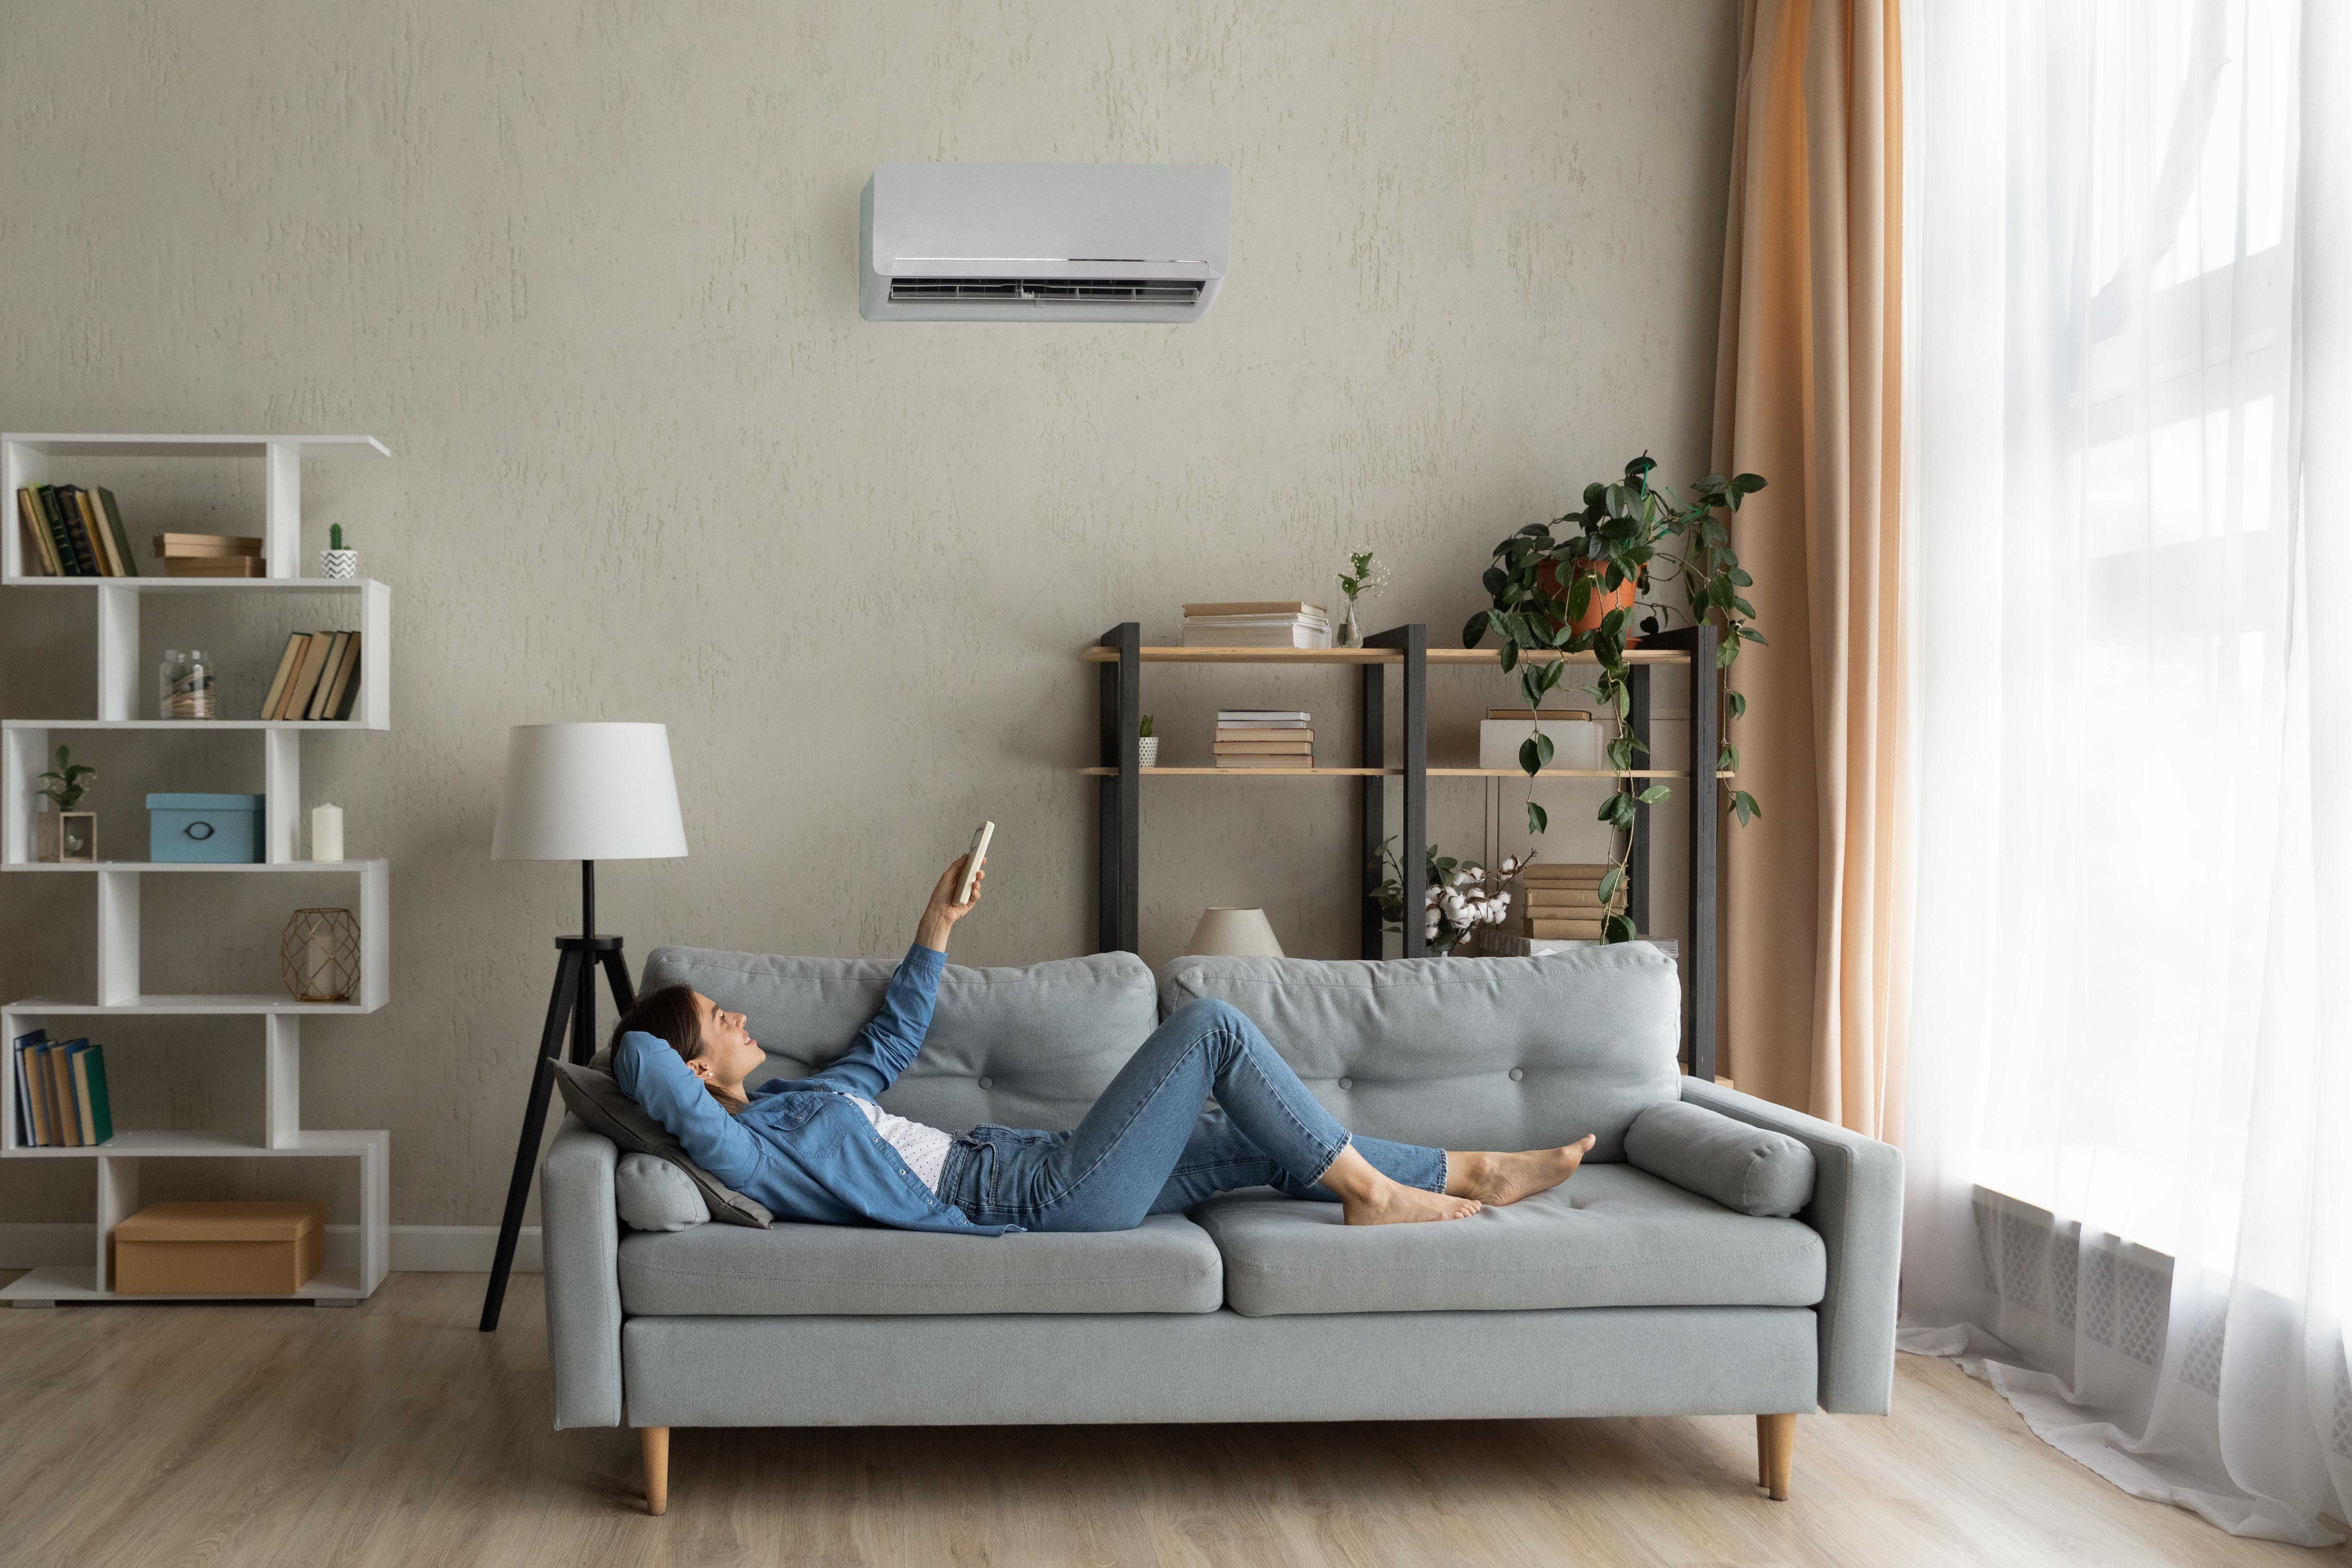 Woman relaxing on couch and adjusting air conditioner